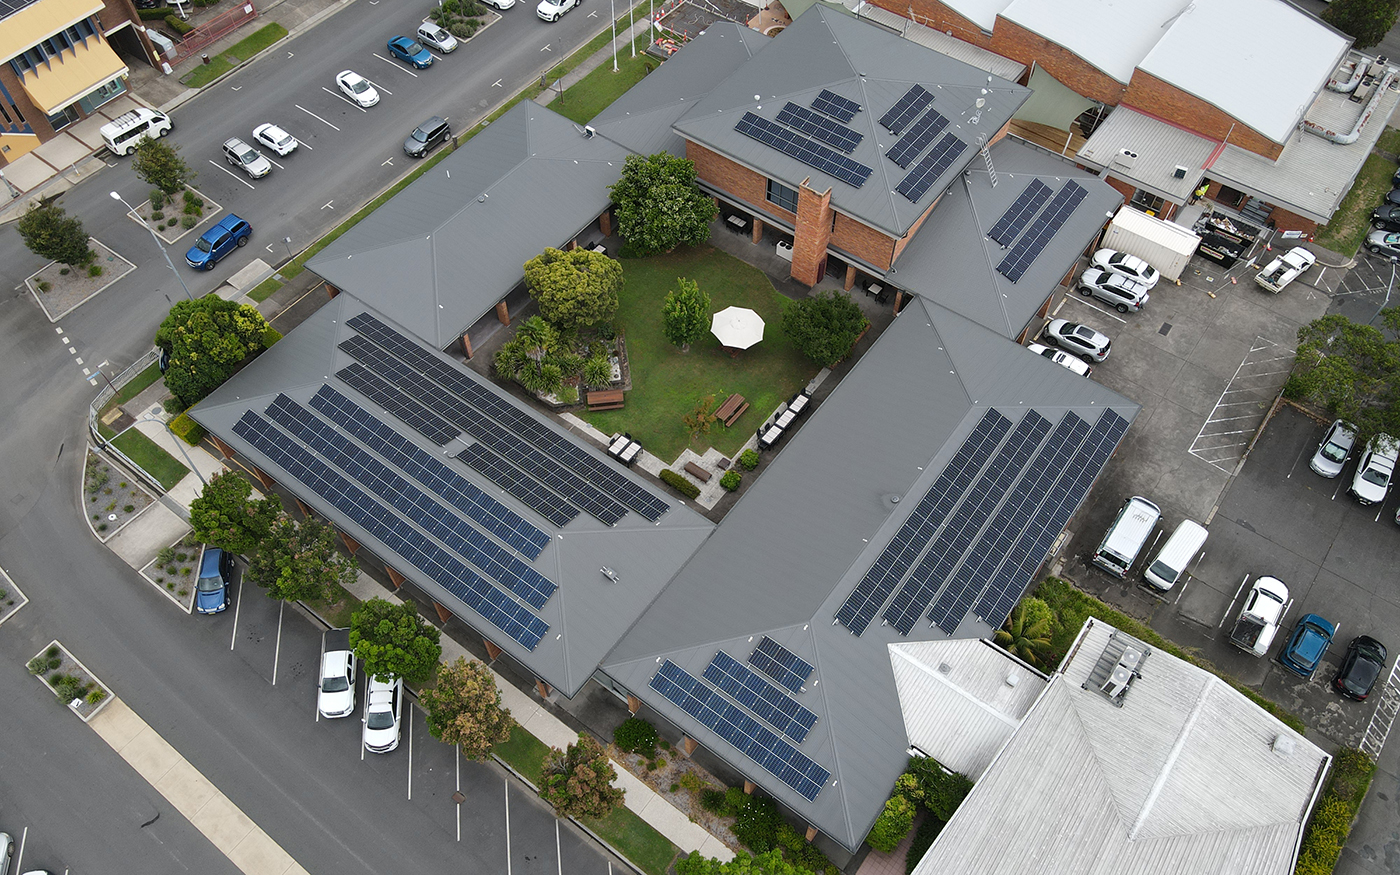 Aerial view of Kempsey Council buildings with solar panels